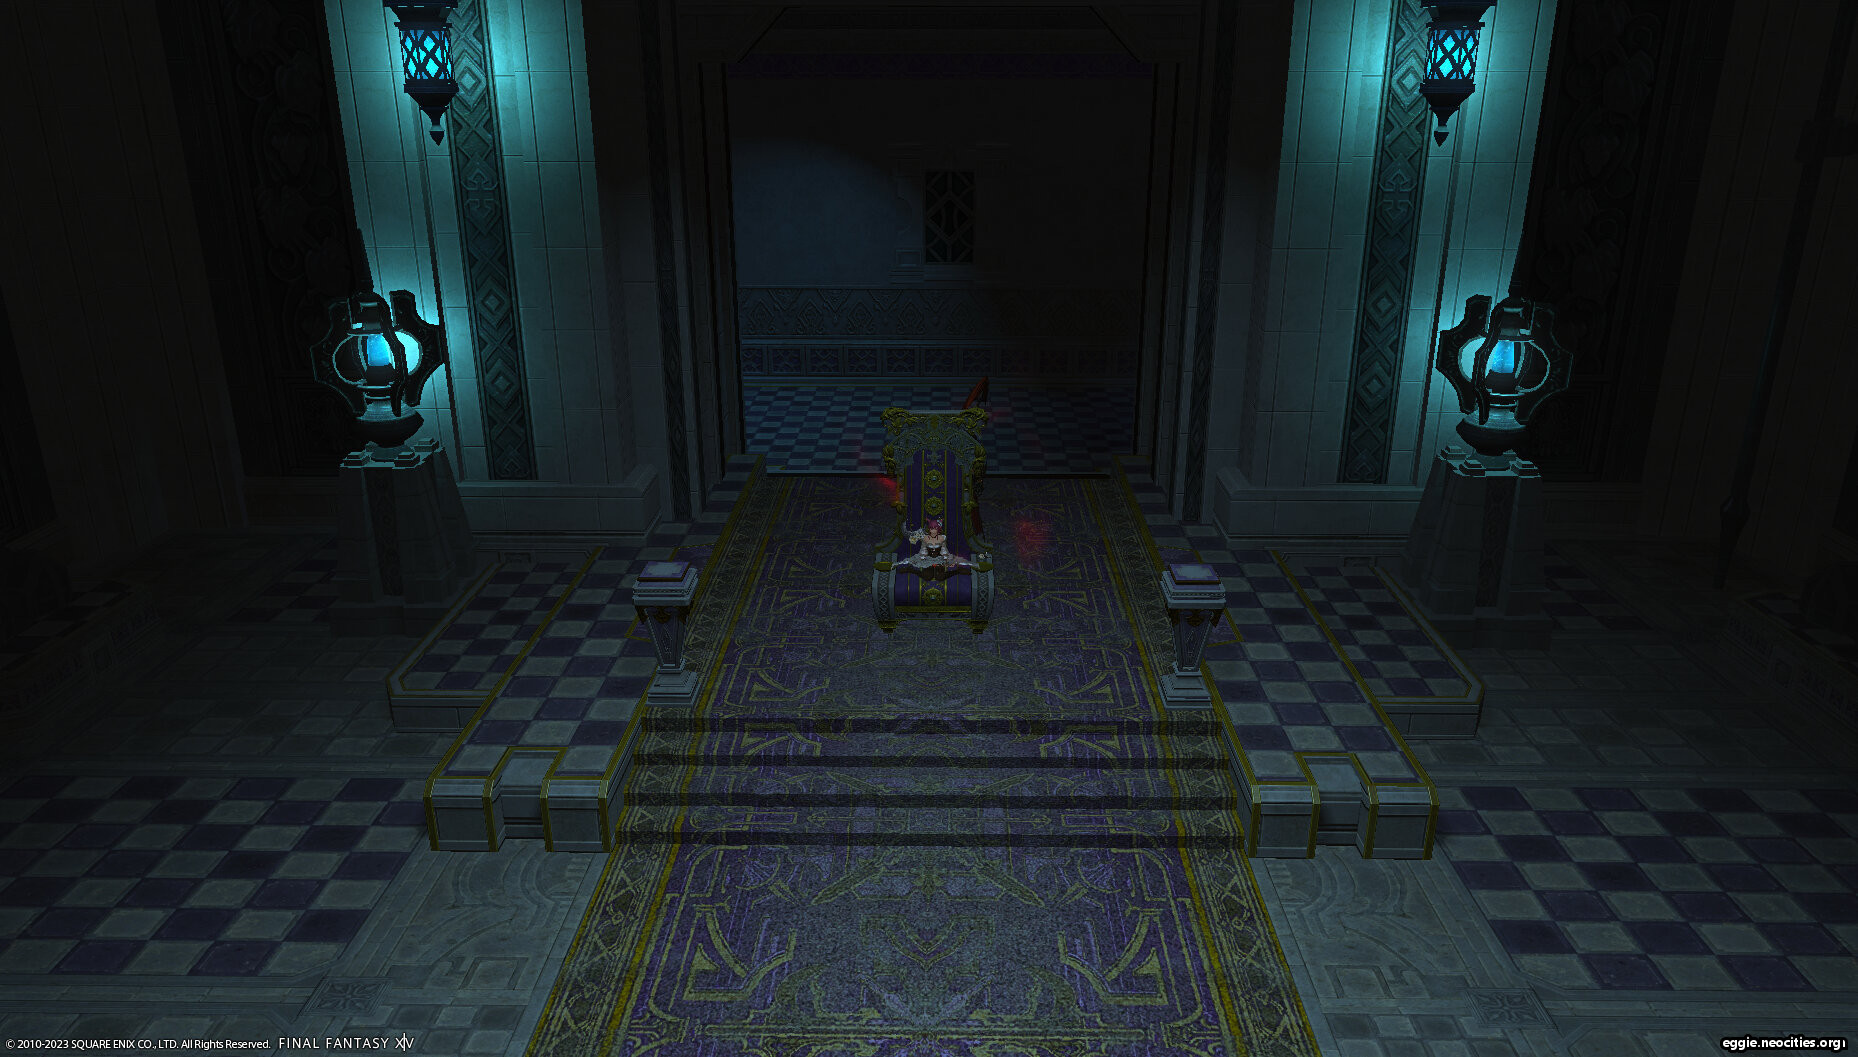 Zel sitting on the throne of Sil'dih. Magris is barely visible lurking behind the throne.